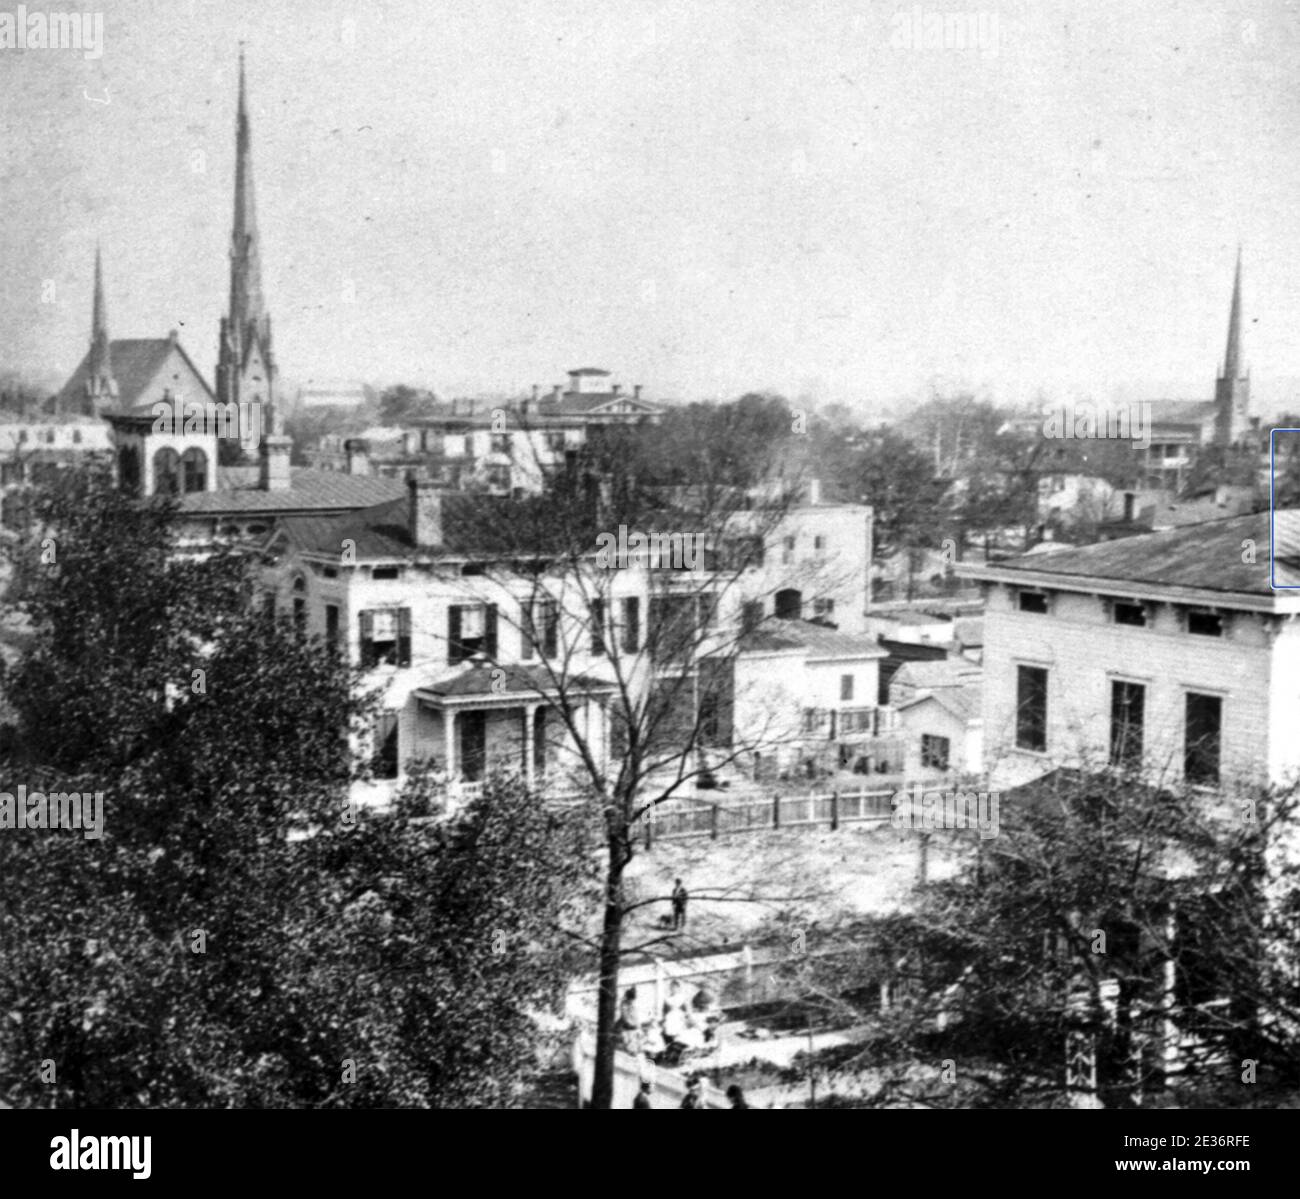 WILMINGTON MASSACRE North Carolina 10 November 1898. General view of the town about 1898. Stock Photo